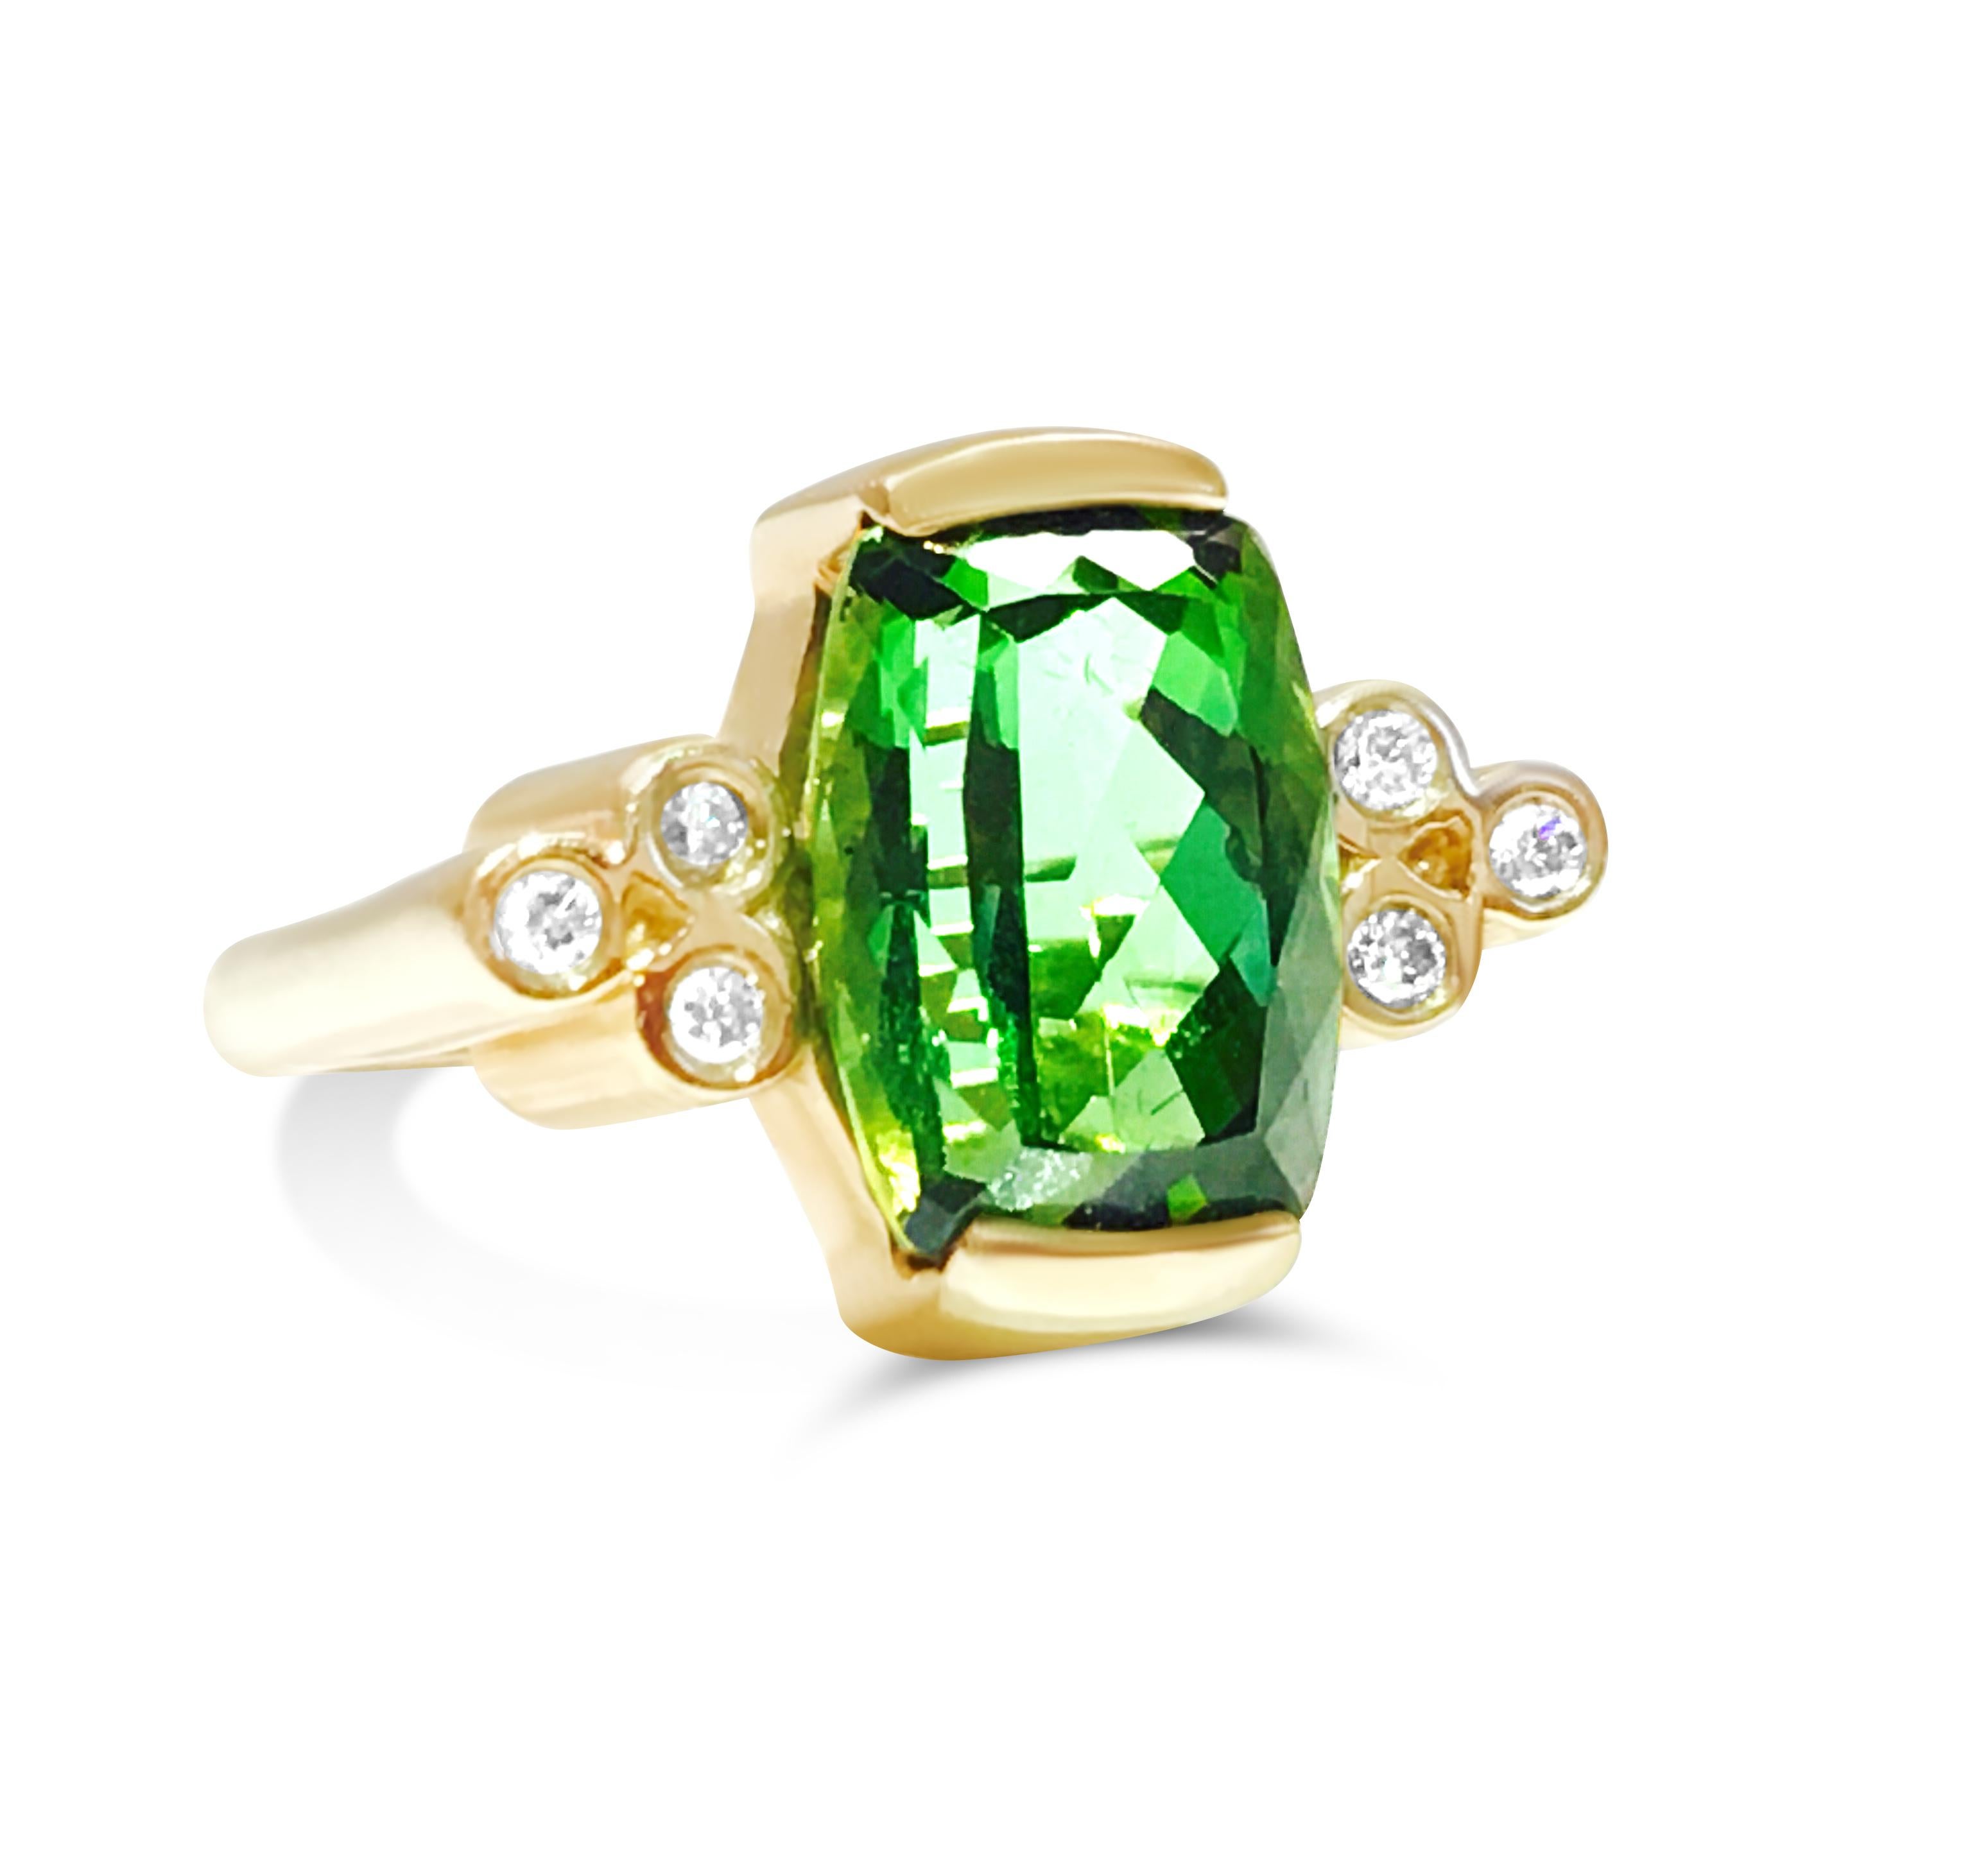 Adorn your finger with timeless allure wearing this vintage green tourmaline ring, a captivating homage to elegance and grace. The lush green hue of the tourmaline gemstone exudes an enchanting radiance, evoking nature's serene beauty with every